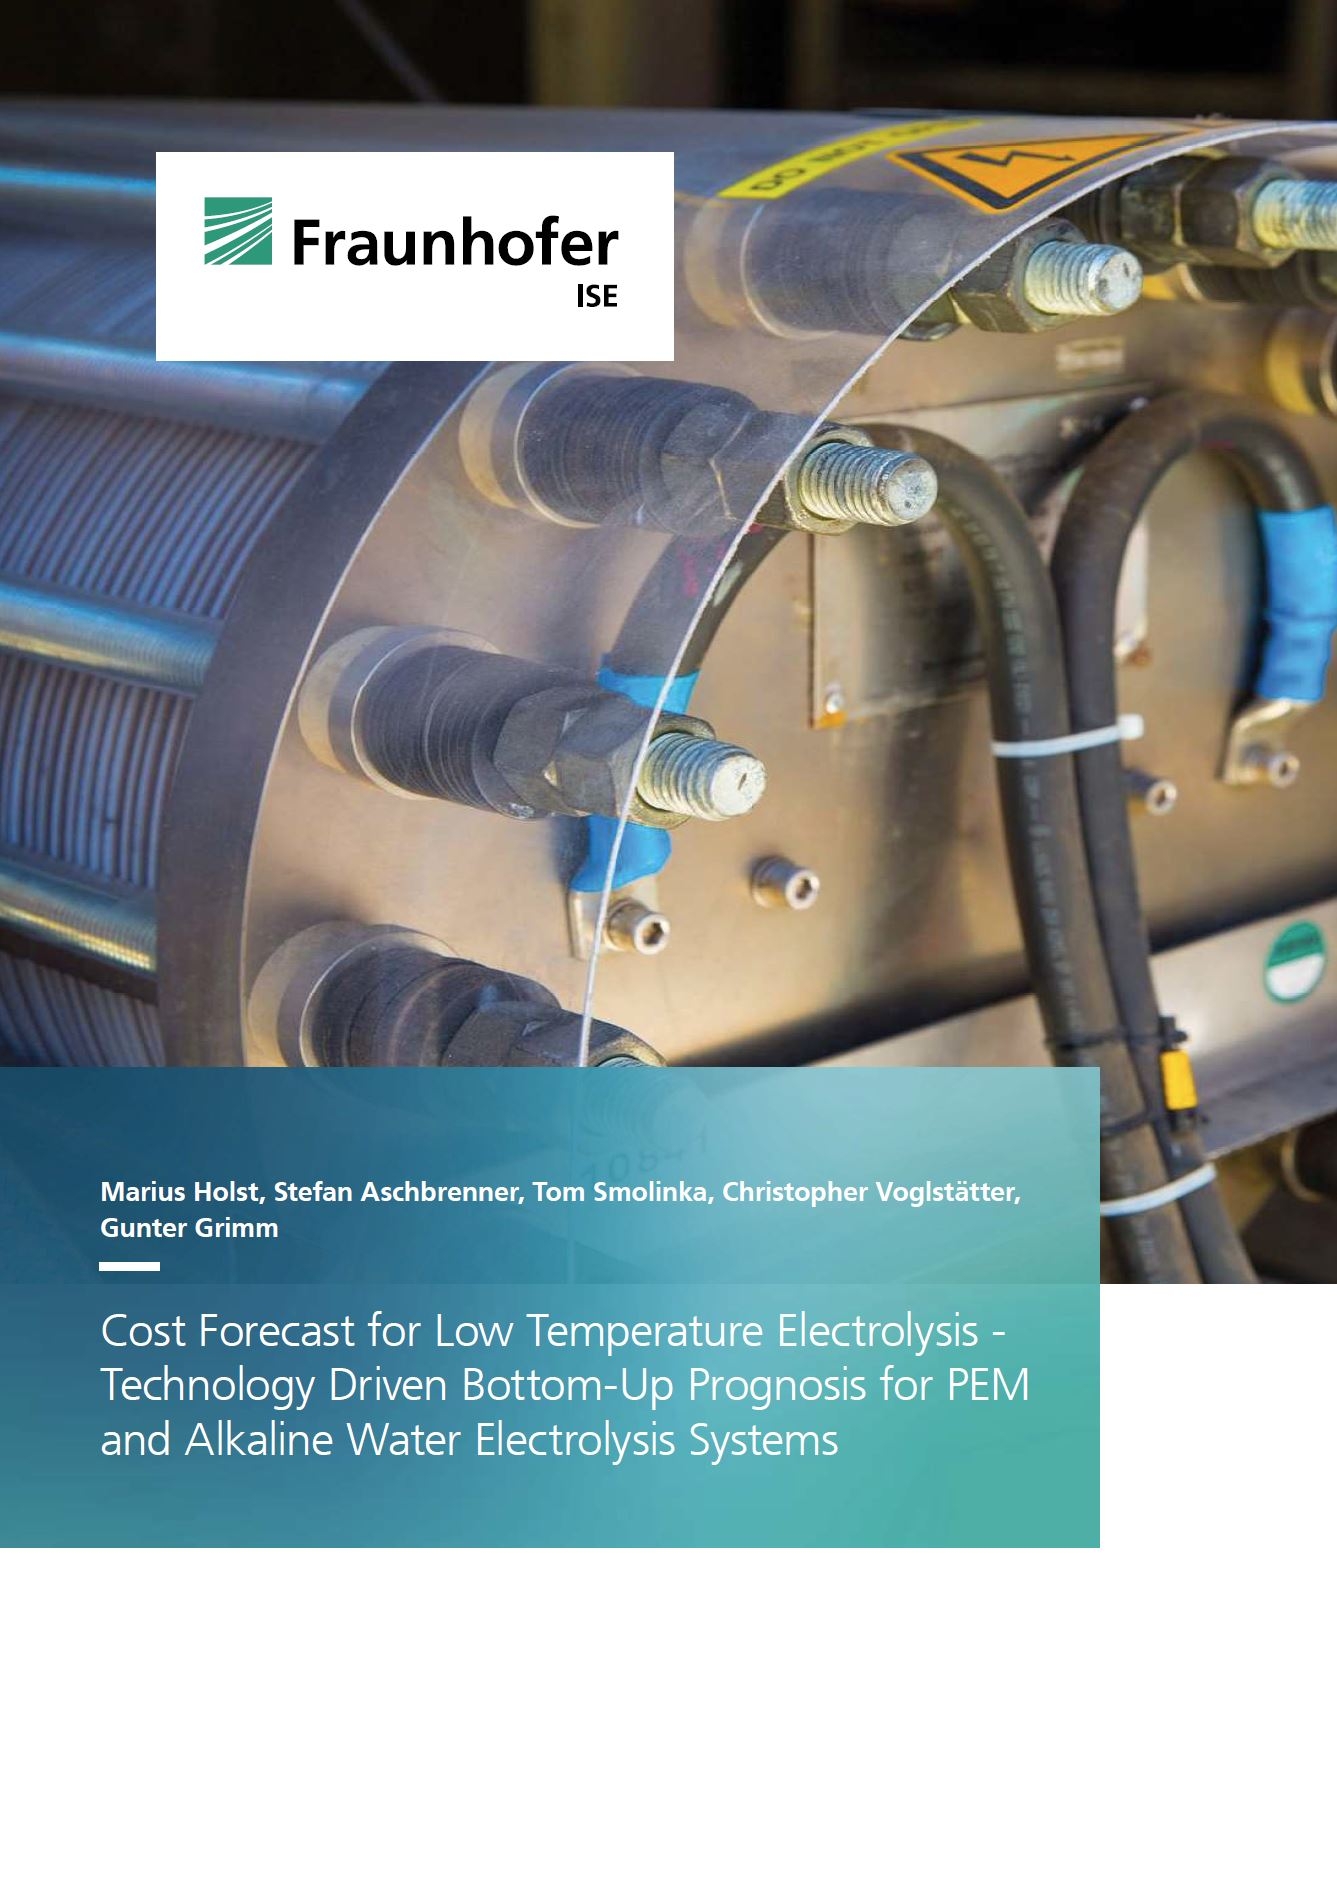 Study: Cost Forecast for Low Temperature Electrolysis